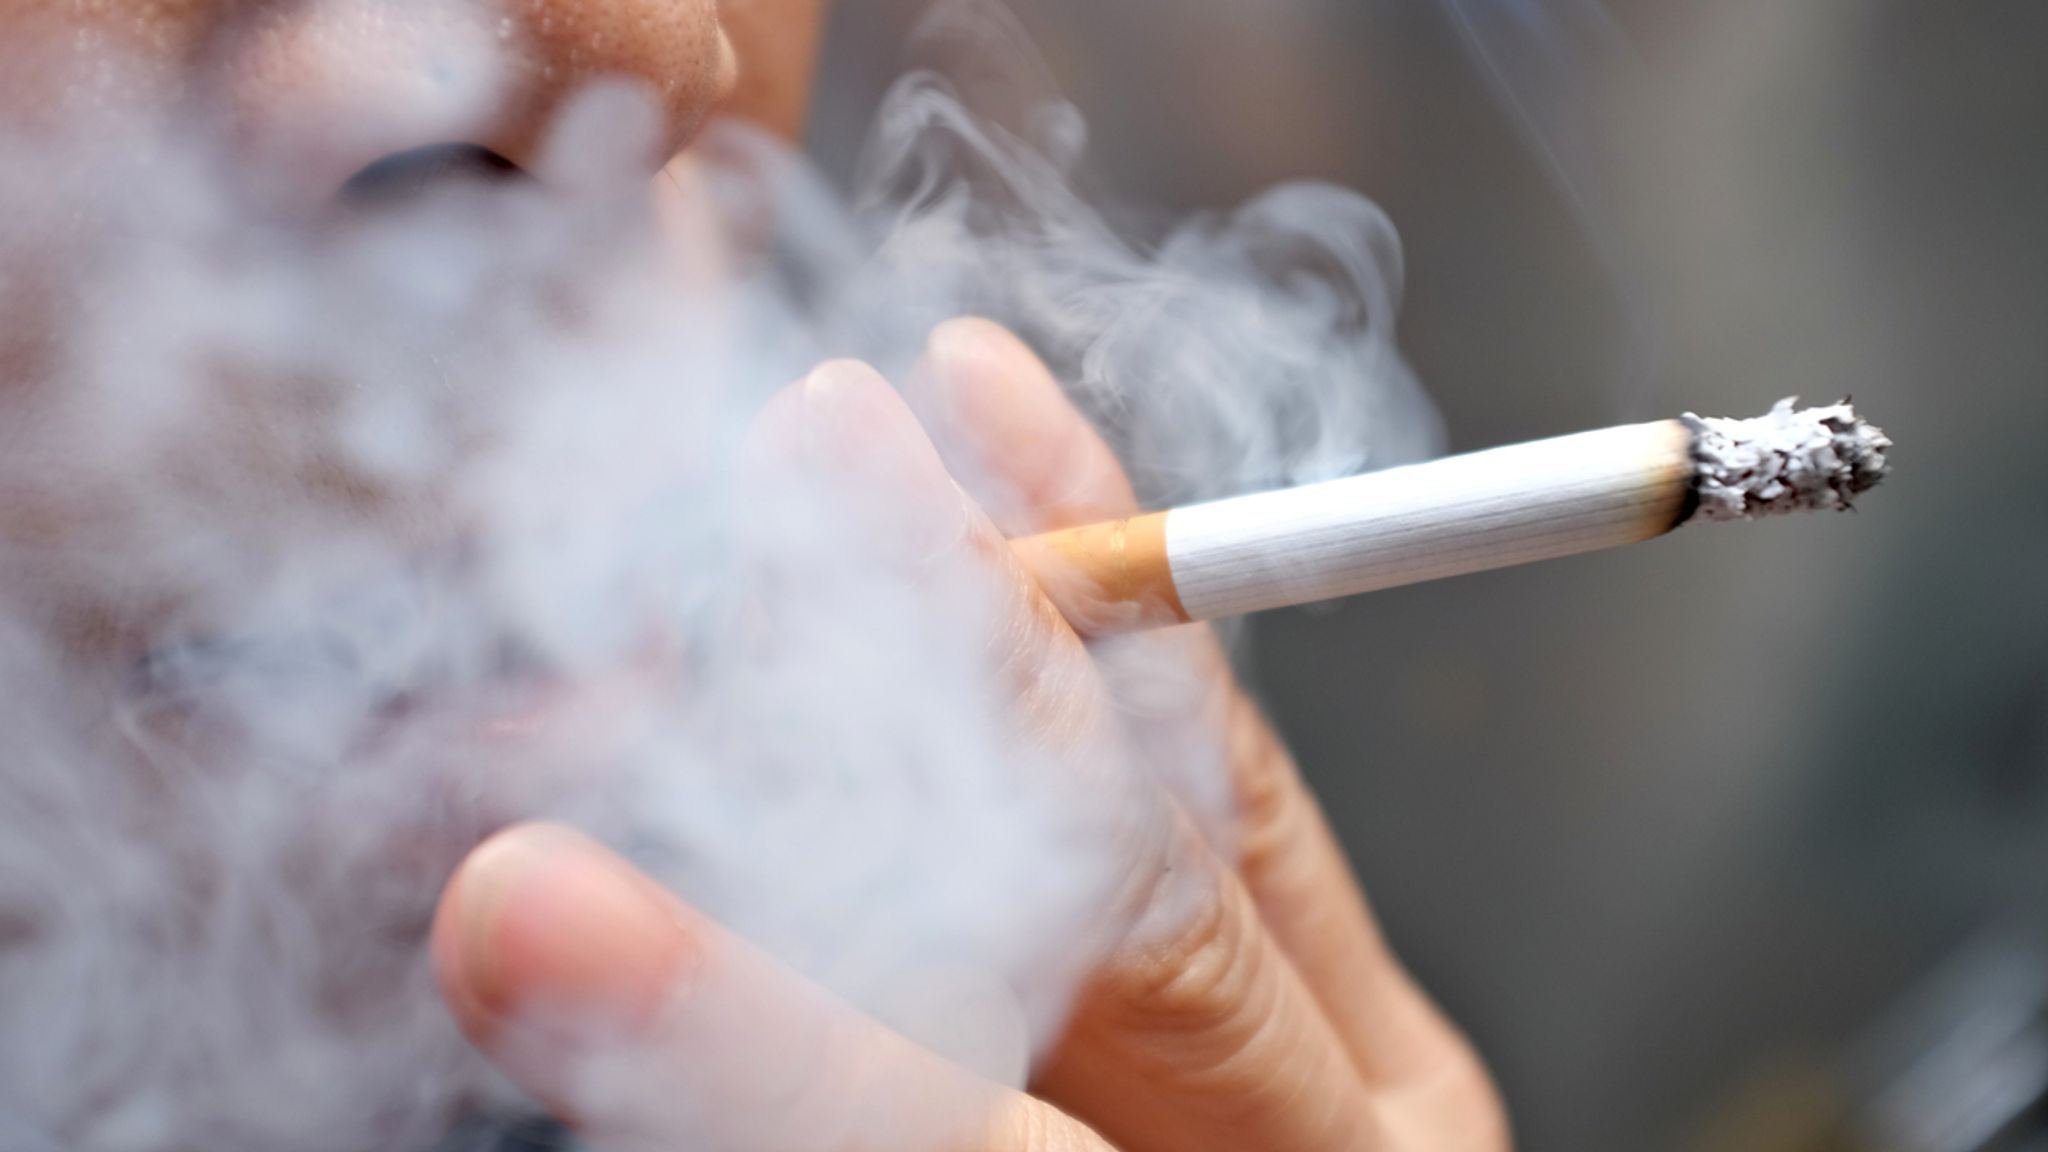 Smokers 'twice as likely to quit' with cytisine pills set to be available in UK, study finds